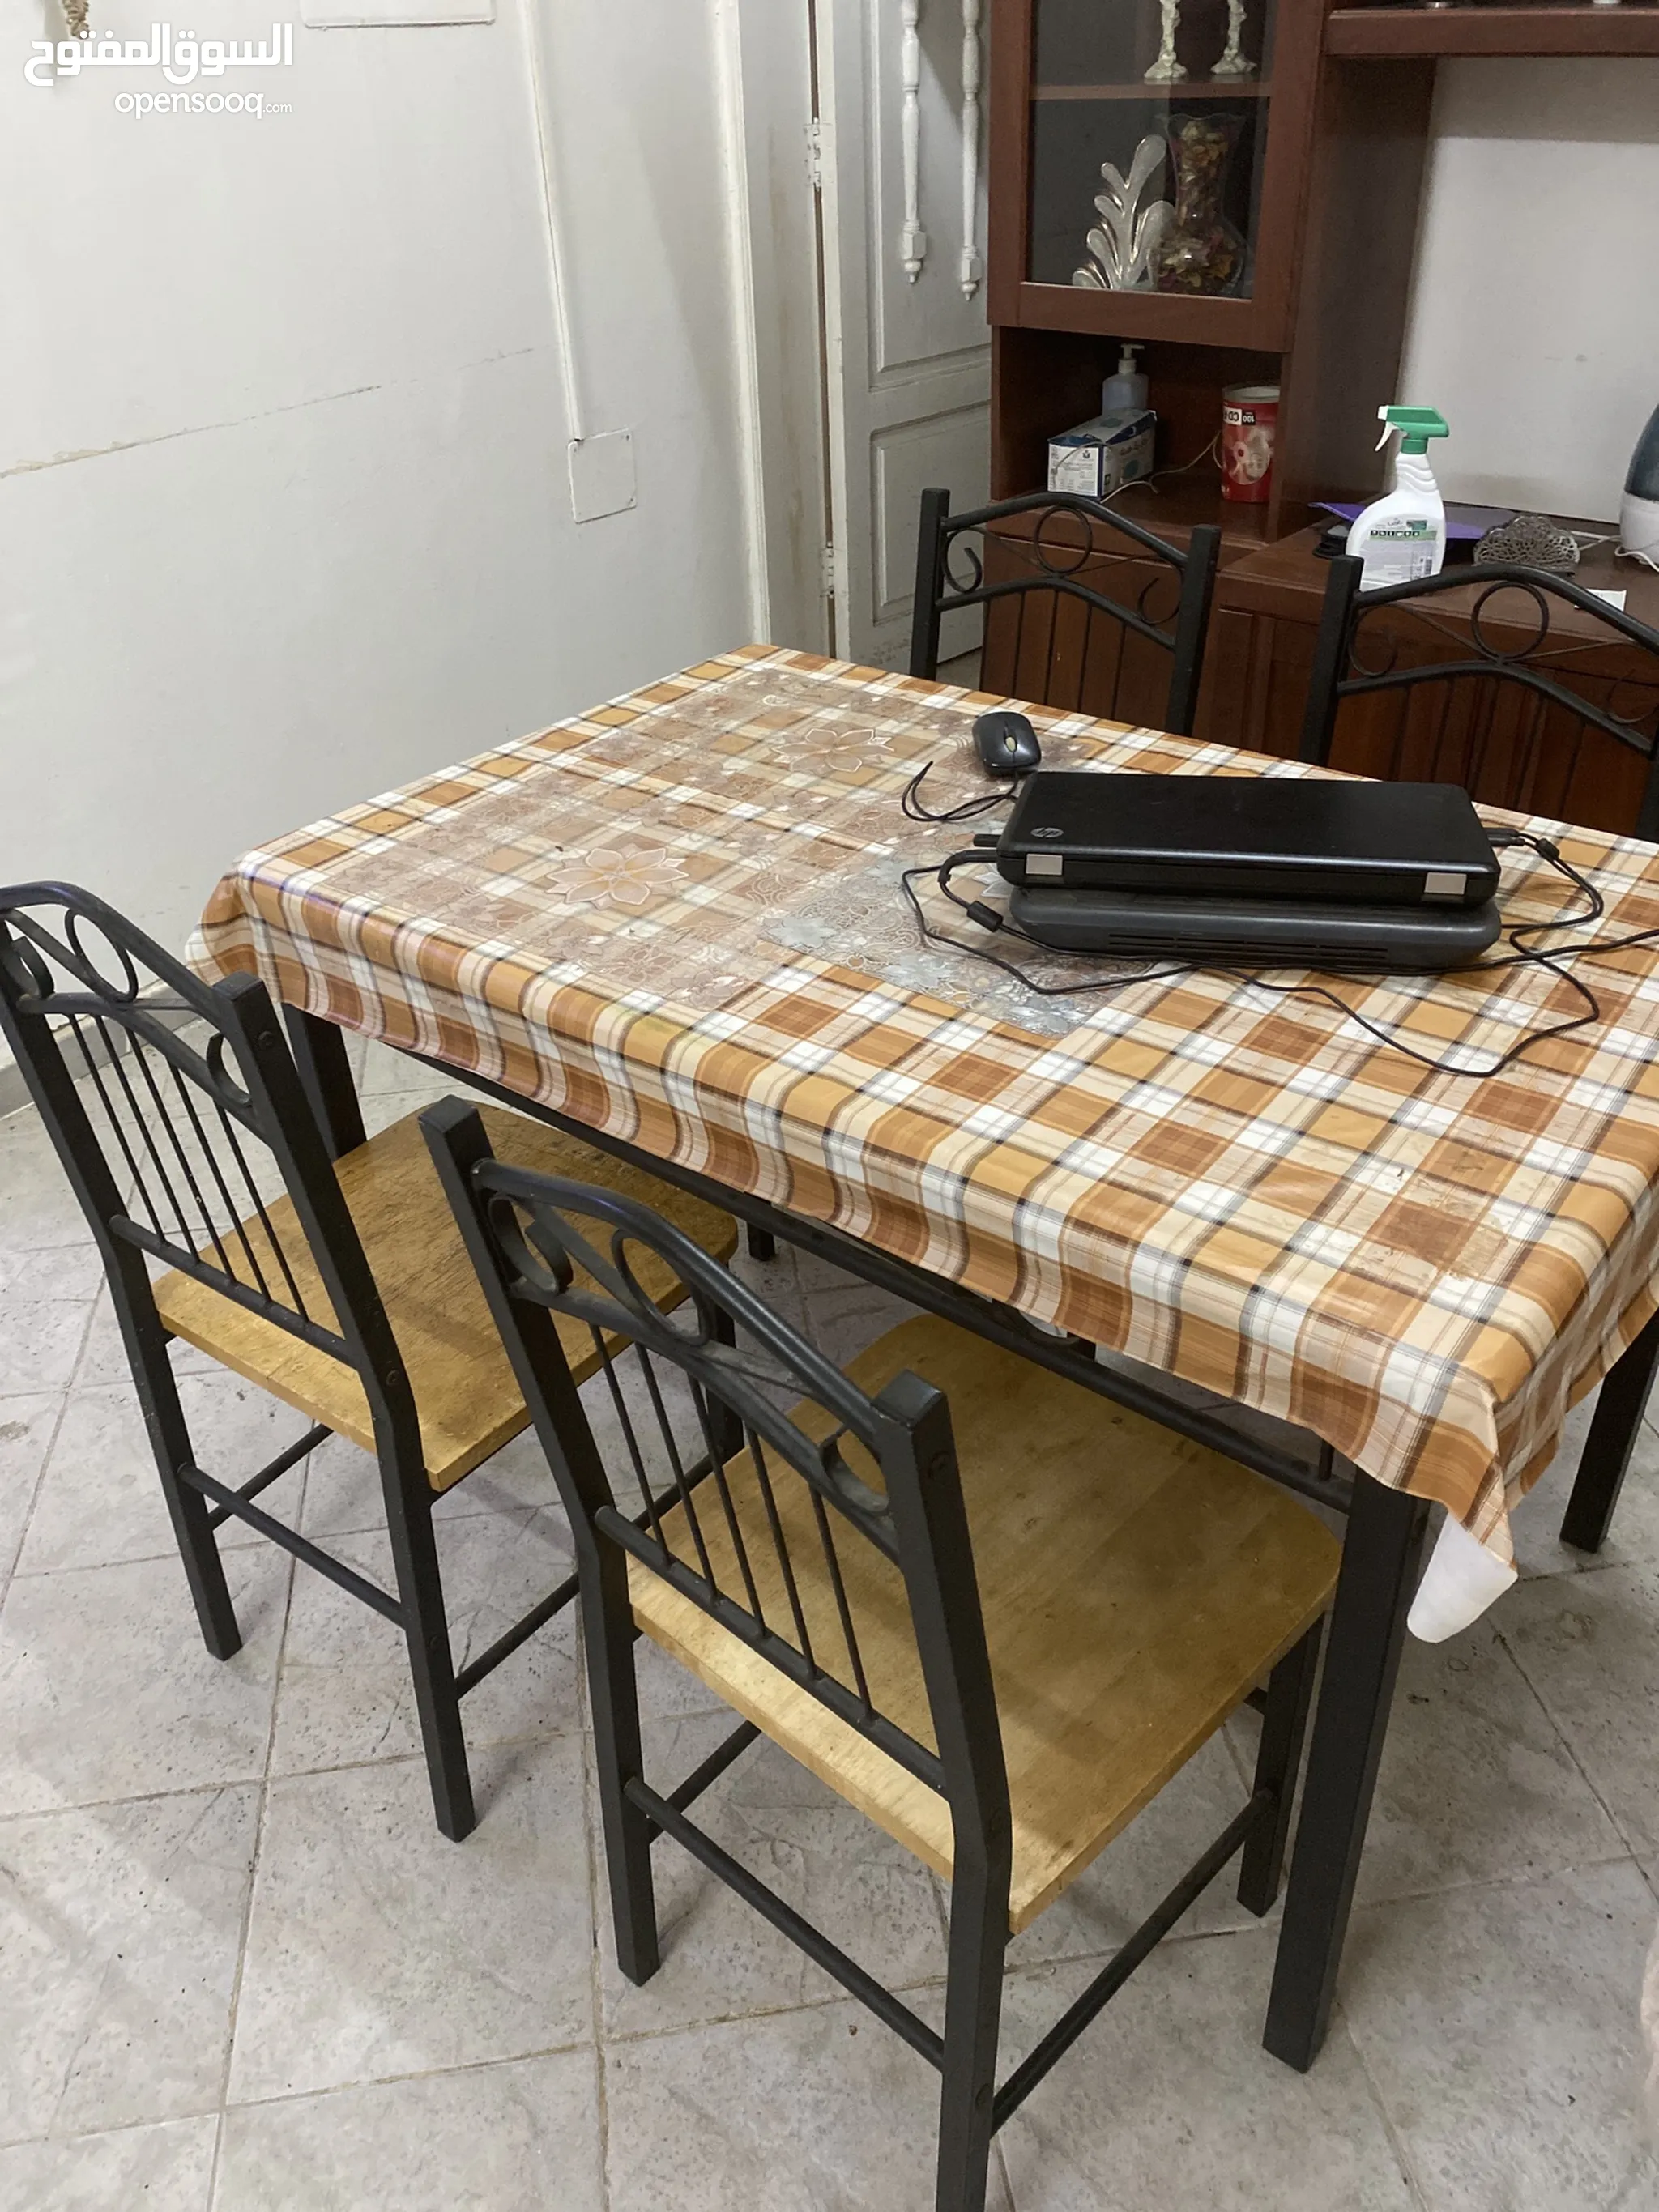 Dining Room Furniture for Sale in Jeddah - Best Deals & Discounts - Tables,  Chairs, Buffets, Bar Stools | OpenSooq